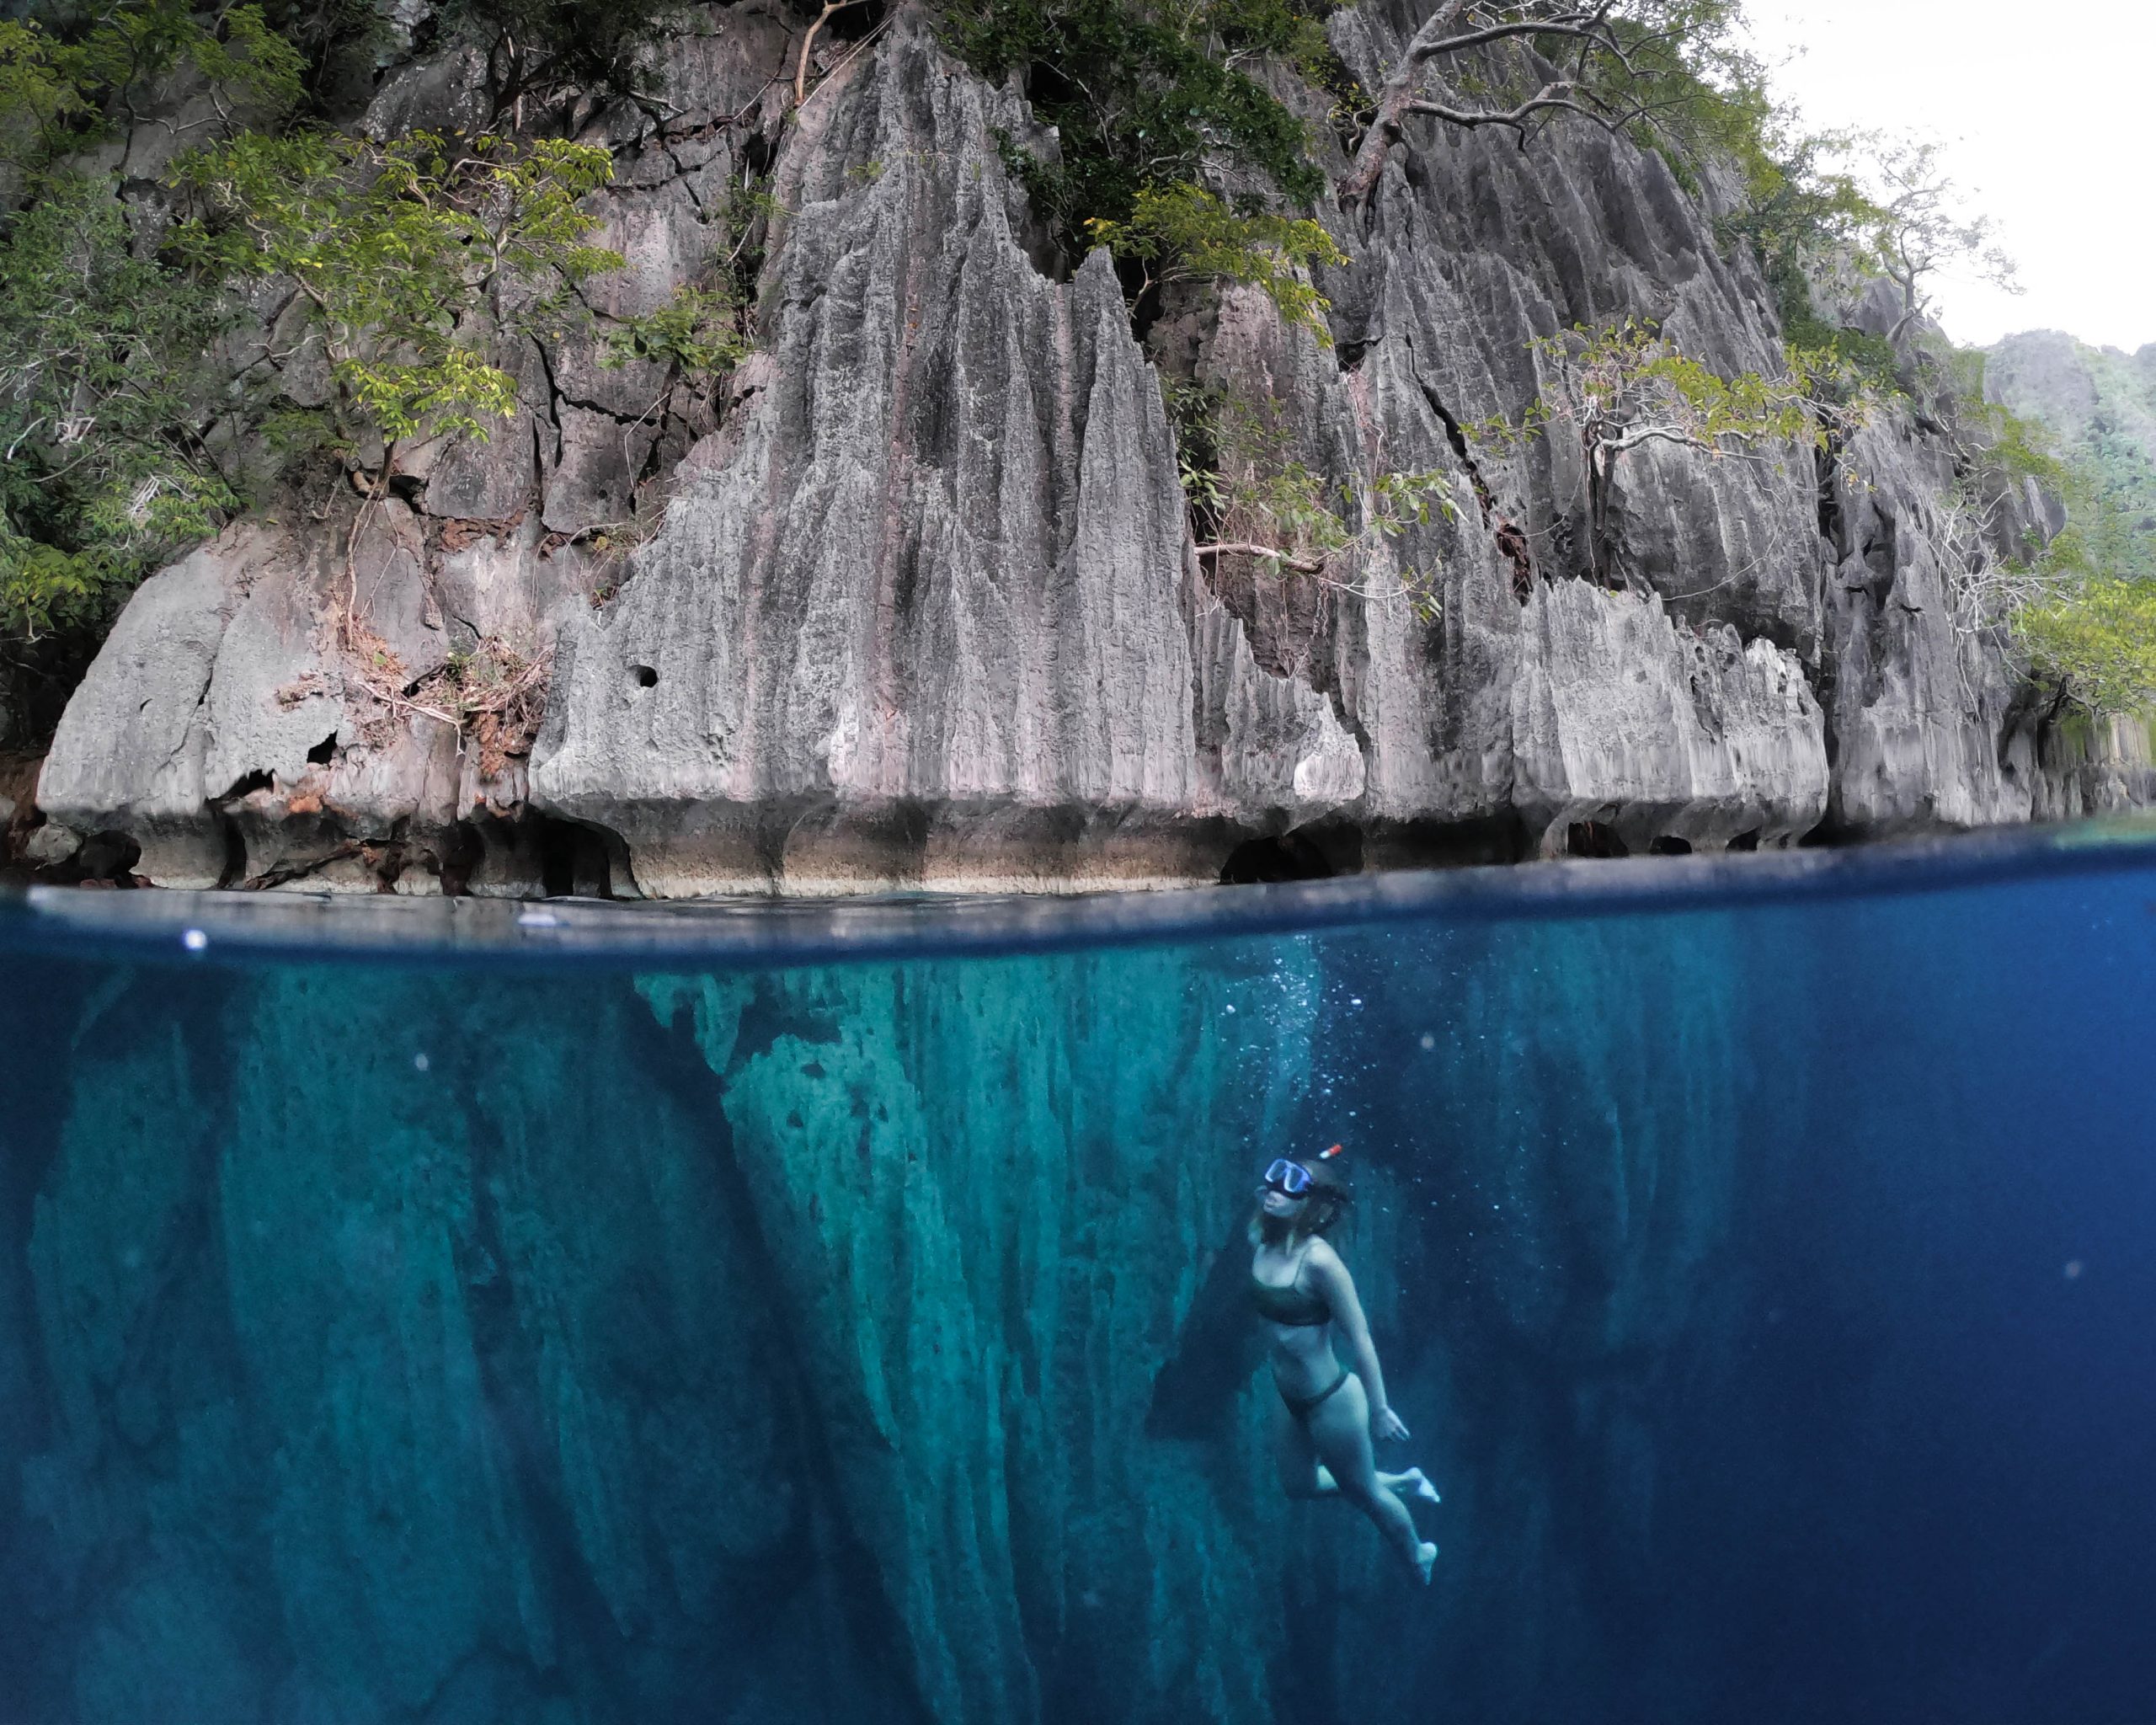 Top 5 Epic Things To Do In Coron